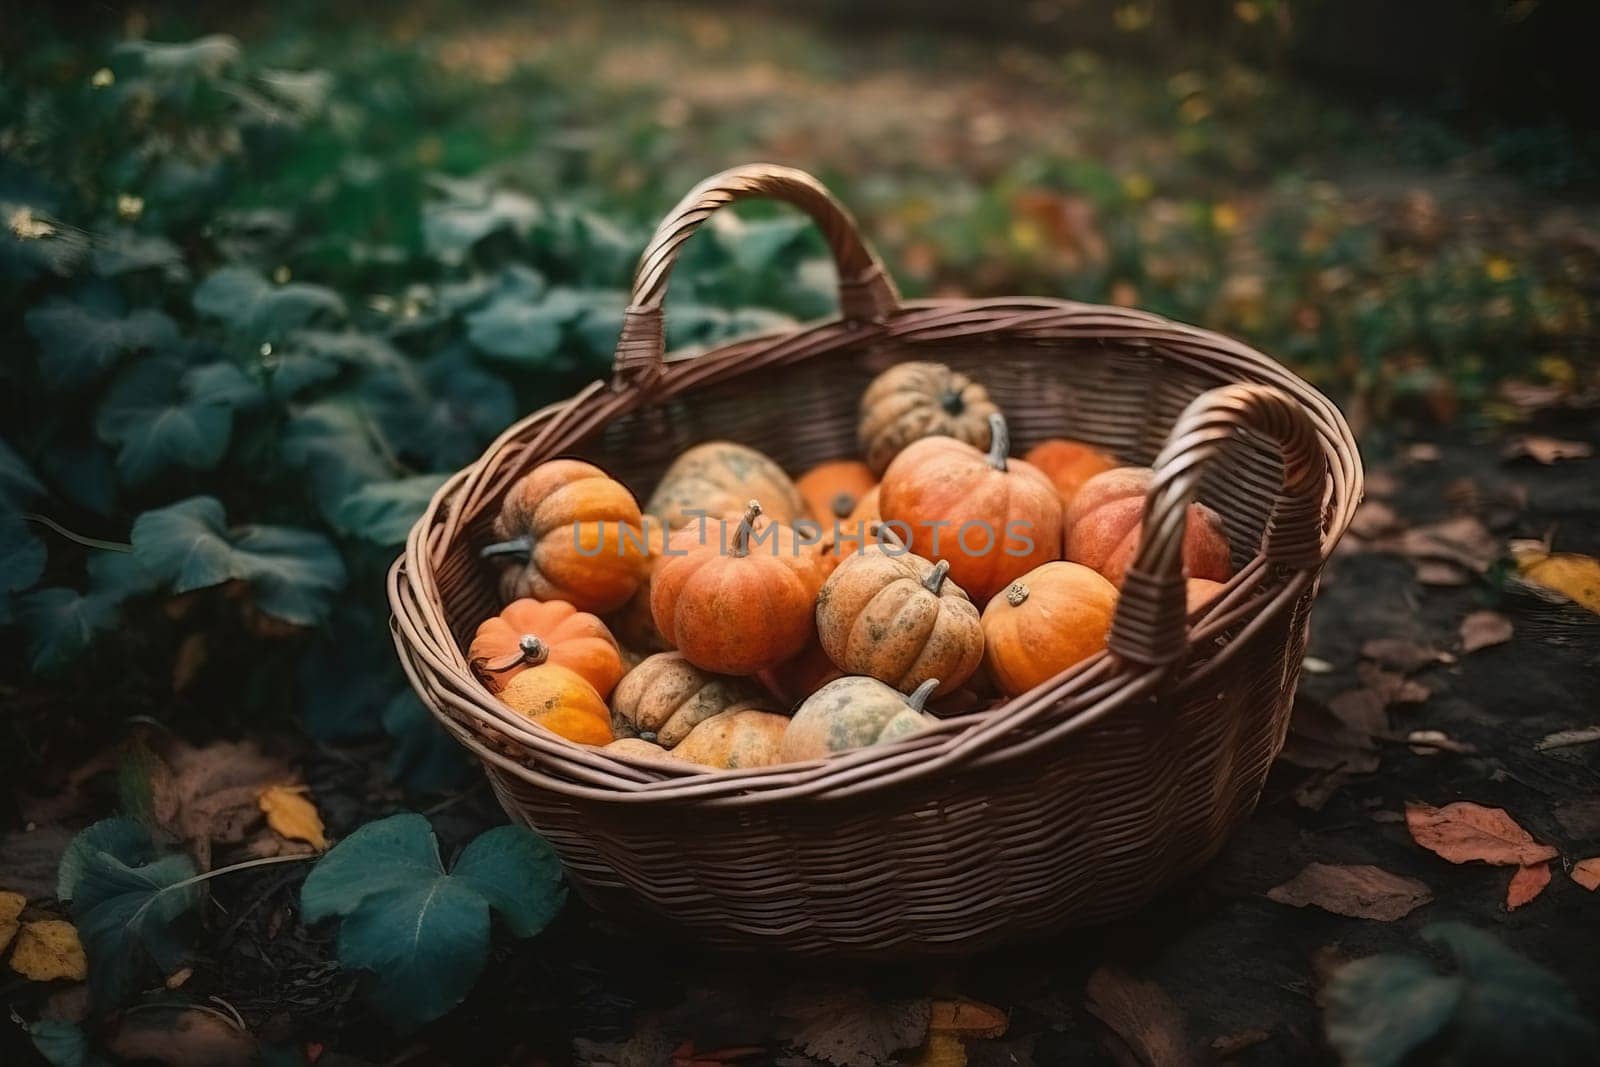 Close-Up View Of A Basket Of Pumpkins Under A Tree In The Forest